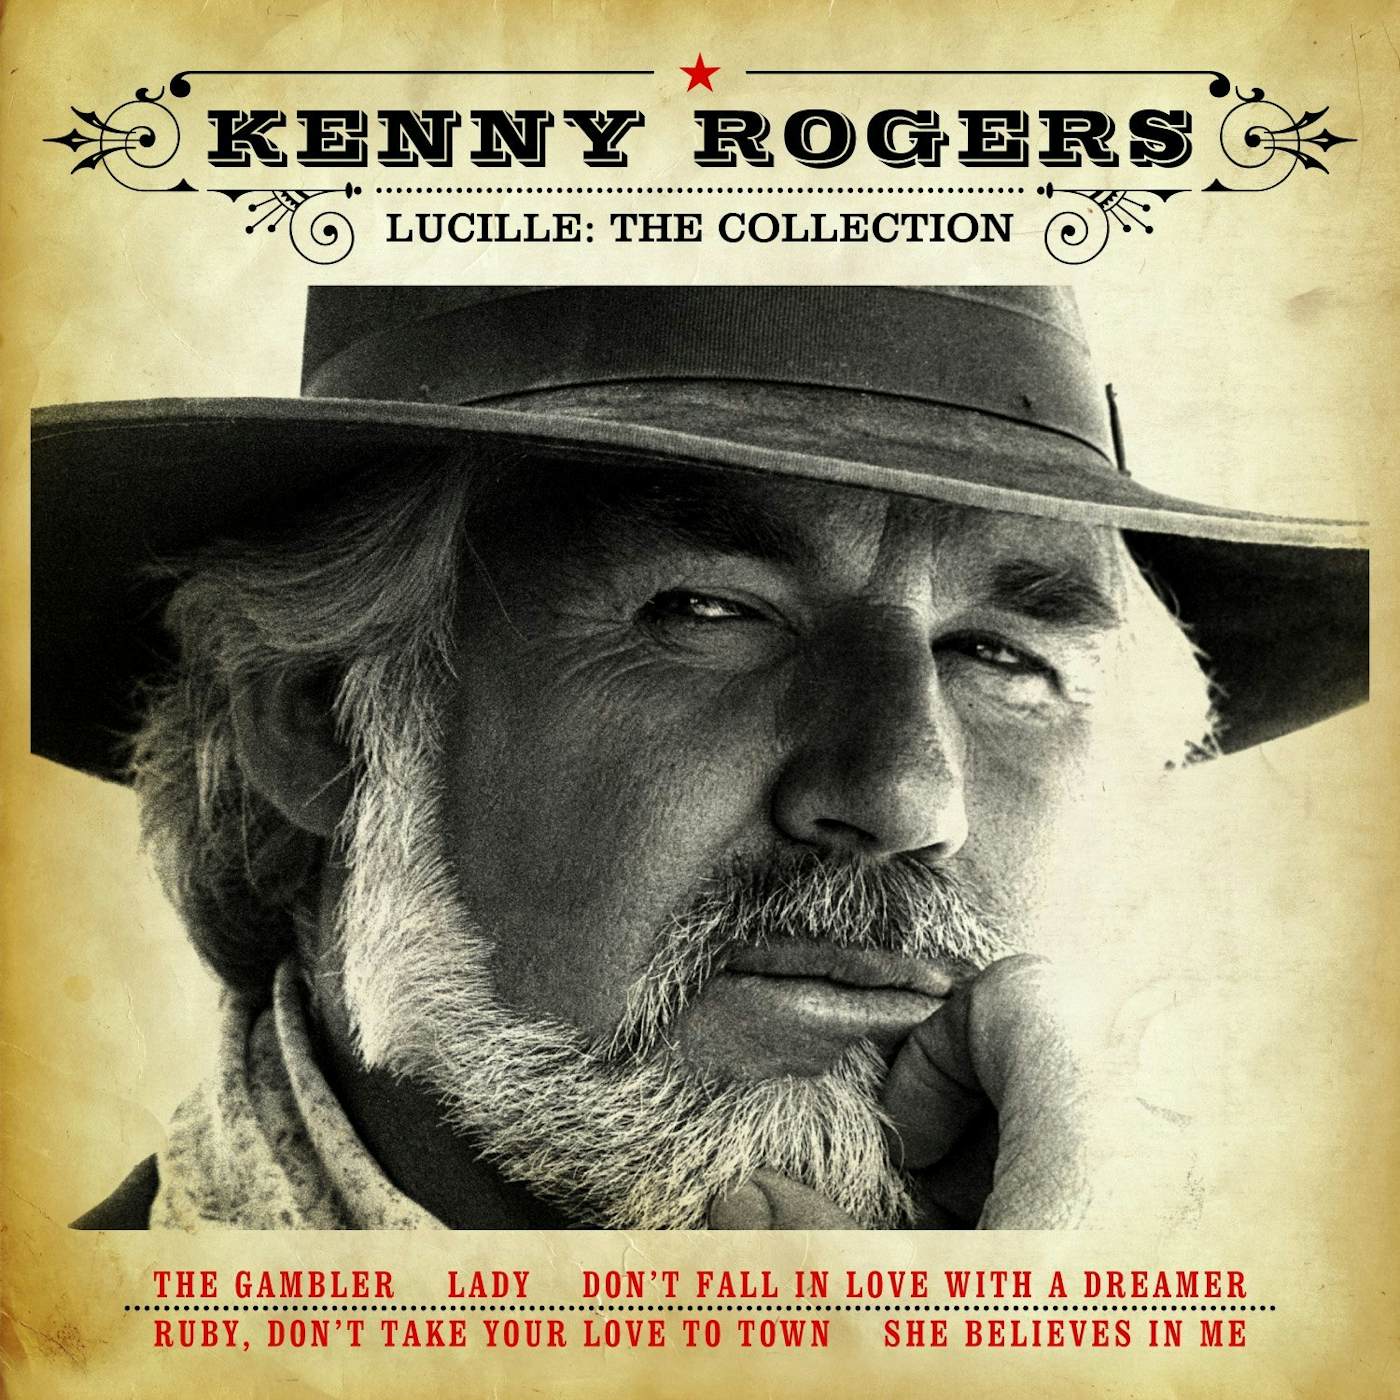 Kenny Rogers LUCILLE: THE COLLECTION CD